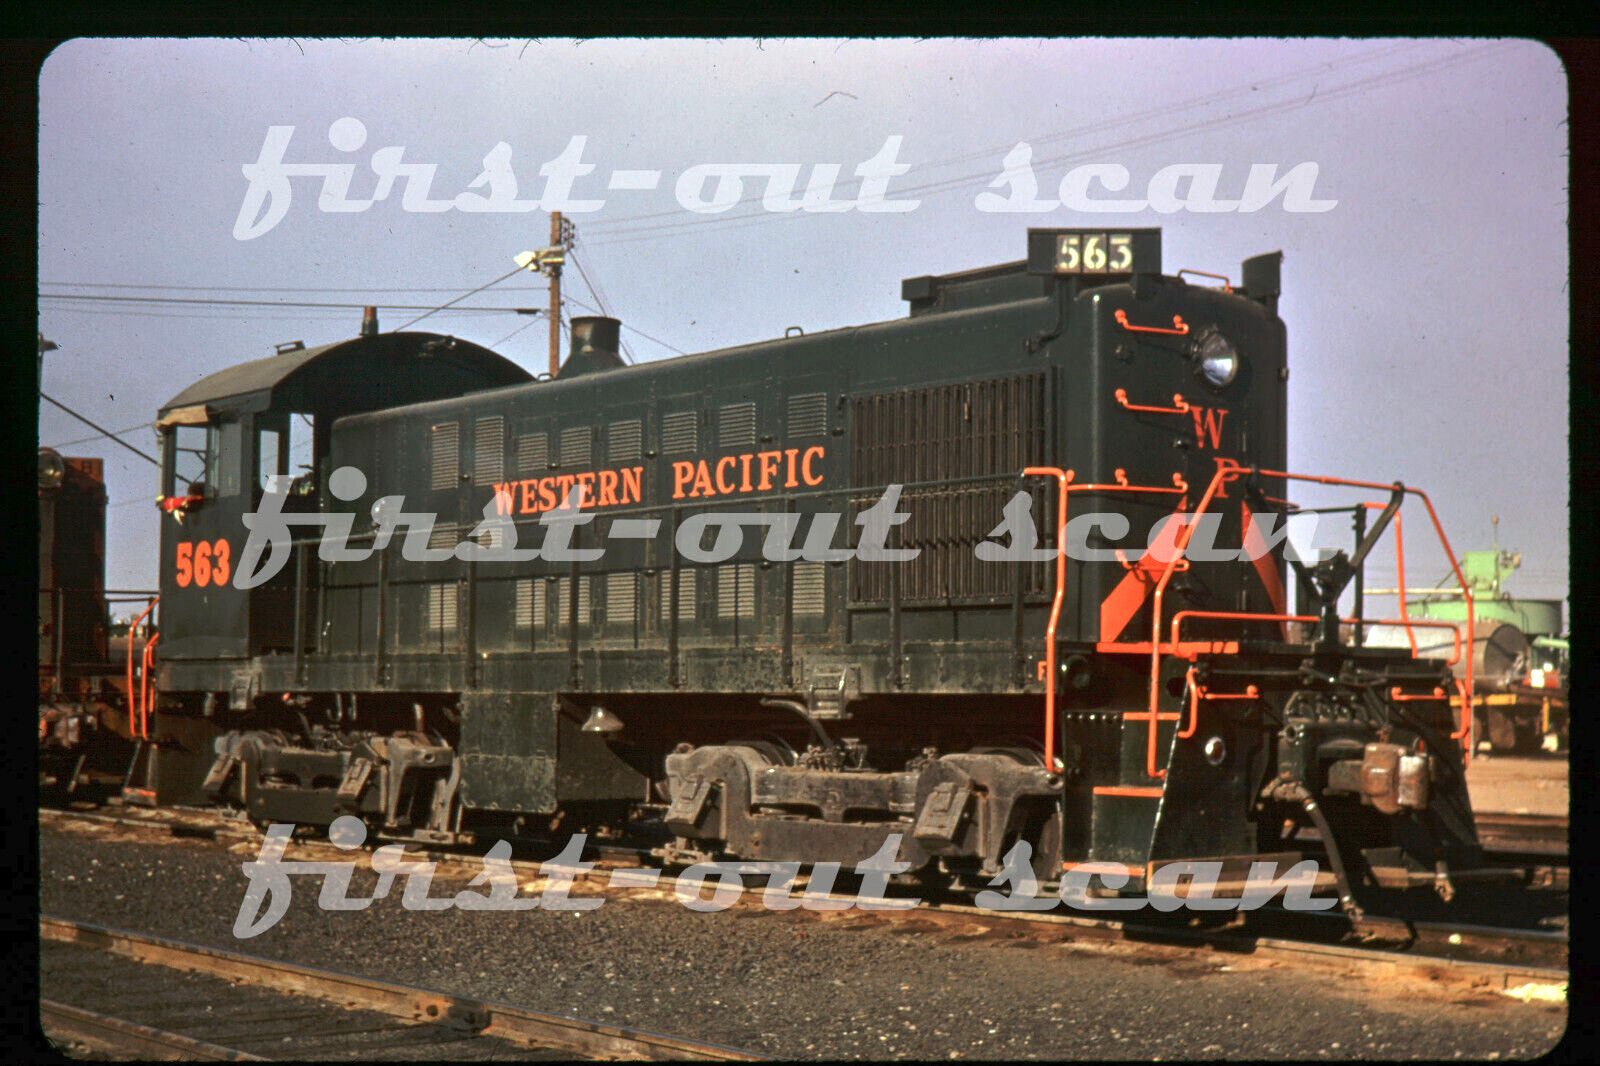 R DUPLICATE SLIDE - Western Pacific WP 563 ALCO S-4